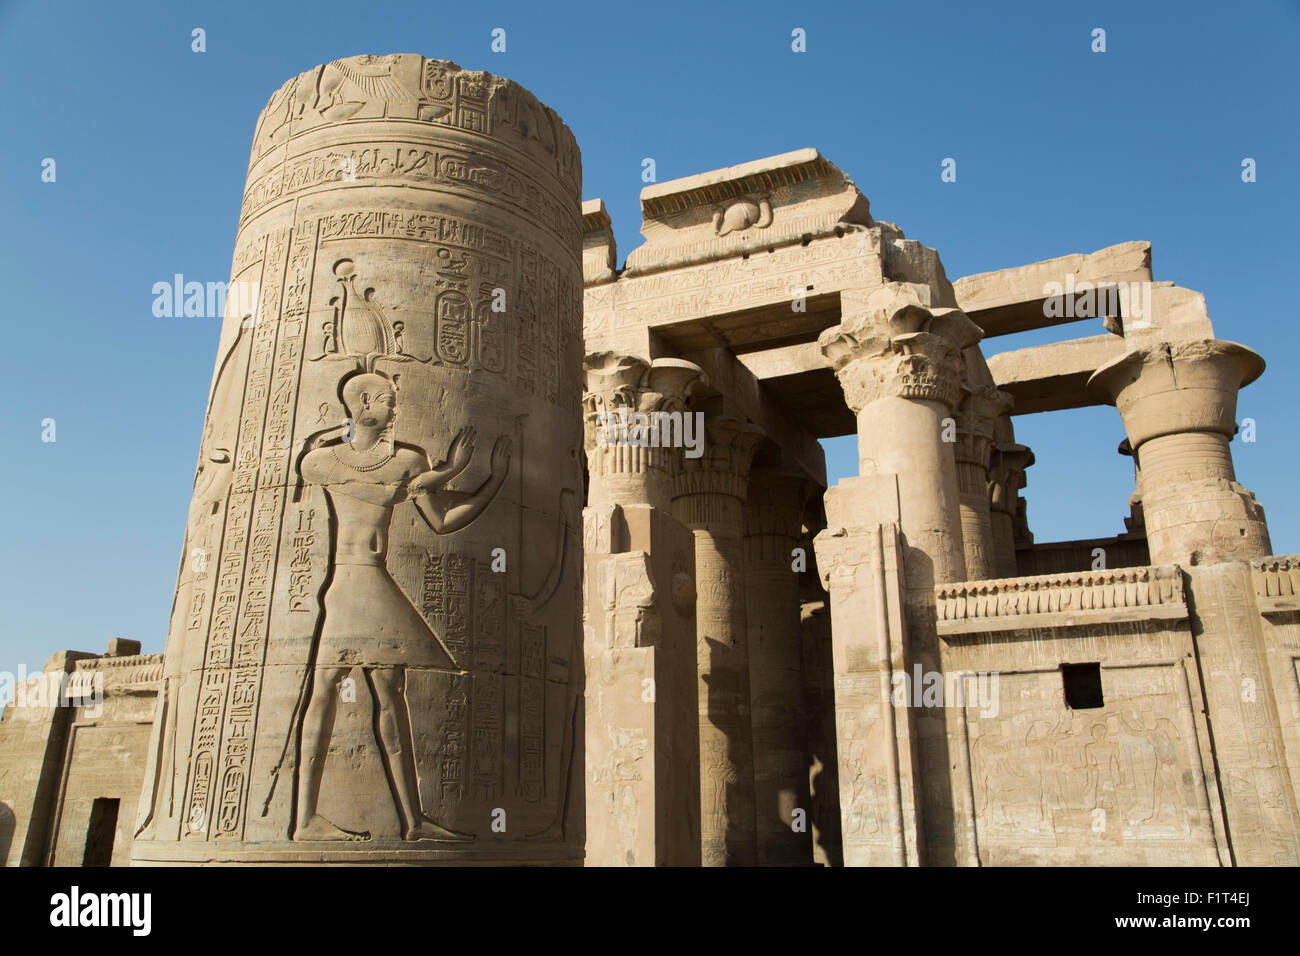 Pillar with bas-relief, Forecourt, Temple of Haroeris and Sobek, Kom Ombo, Egypt, North Africa, Africa Stock Photo